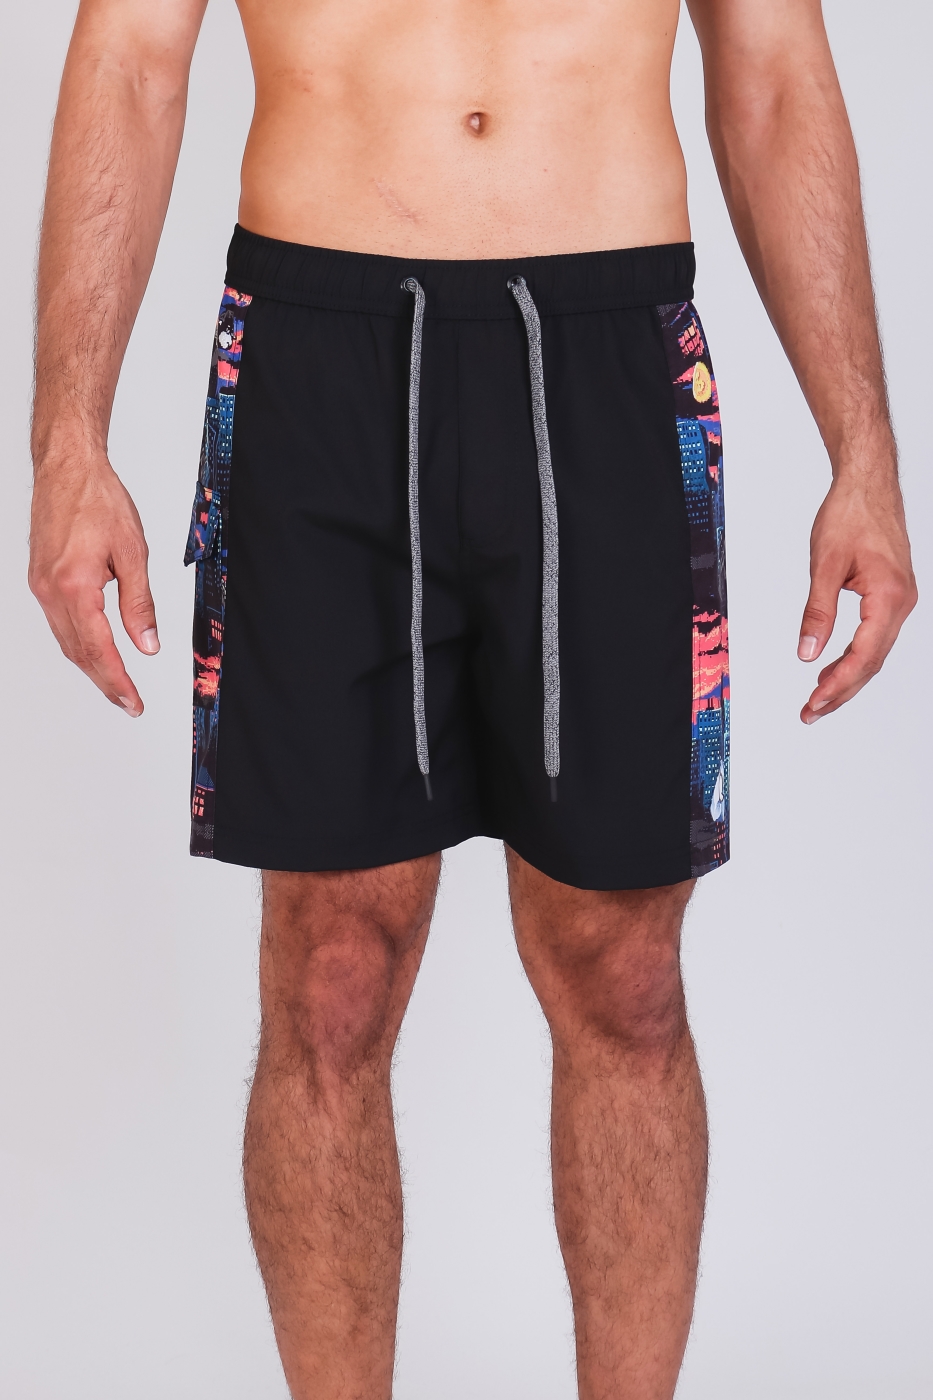 Lazyshorts Game Over Lost